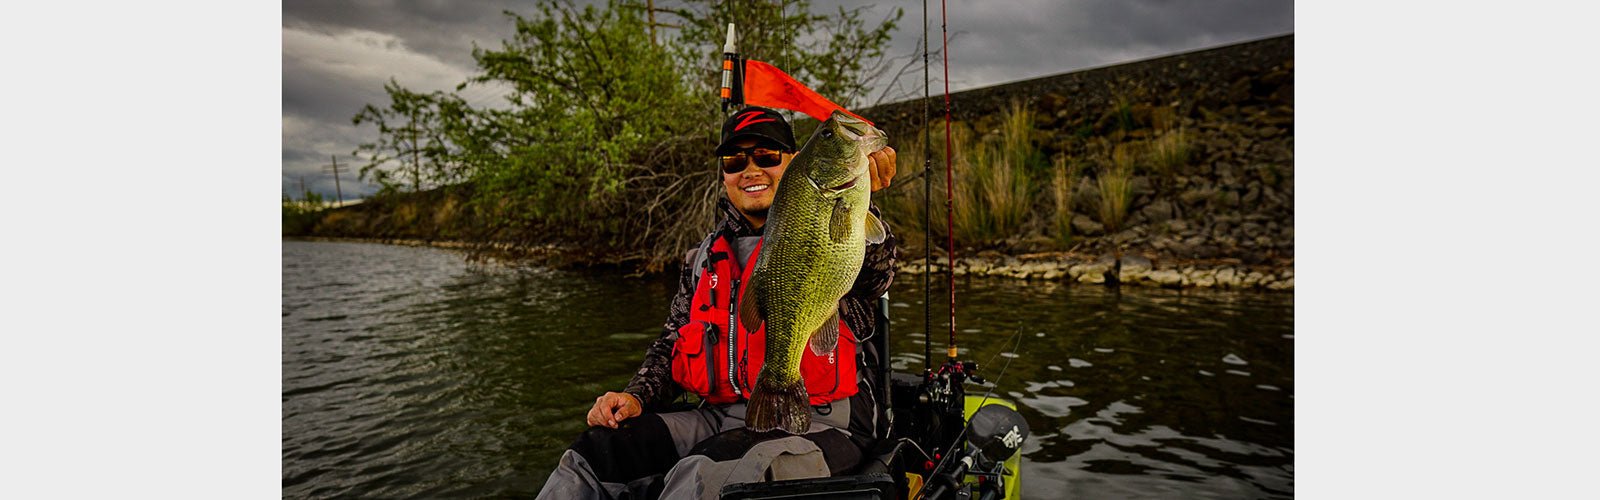 TOP 6 Accessories For New Kayak Anglers - Next Adventure